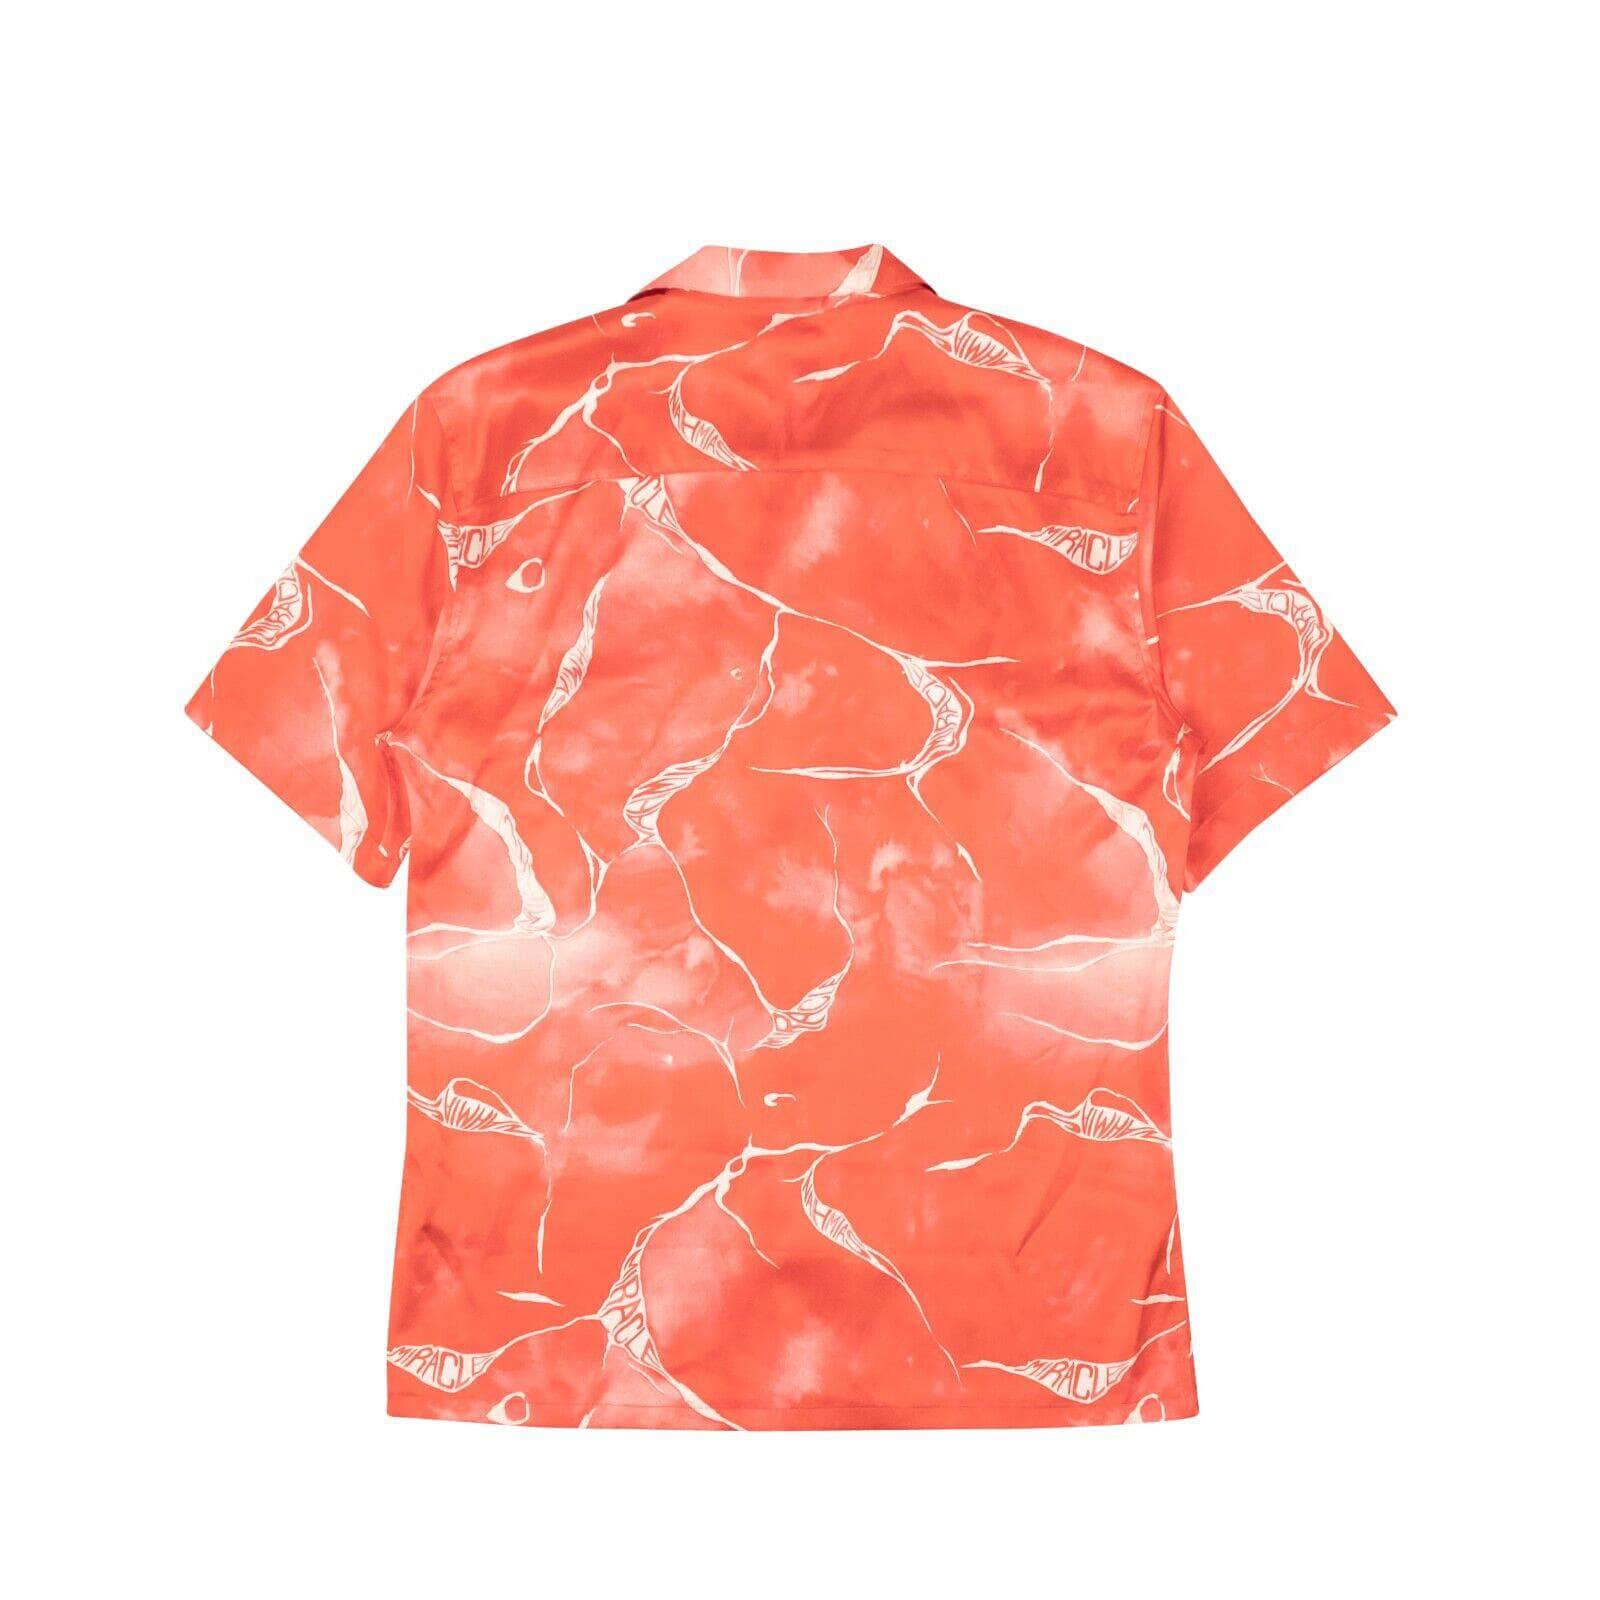 Nahmias 250-500, channelenable-all, chicmi, couponcollection, gender-mens, main-clothing, mens-shoes, nahmias, size-l, size-m, size-s, size-xl, size-xs, size-xxl Red Miracle Tie Dye Short Sleeve Button Down Shirt